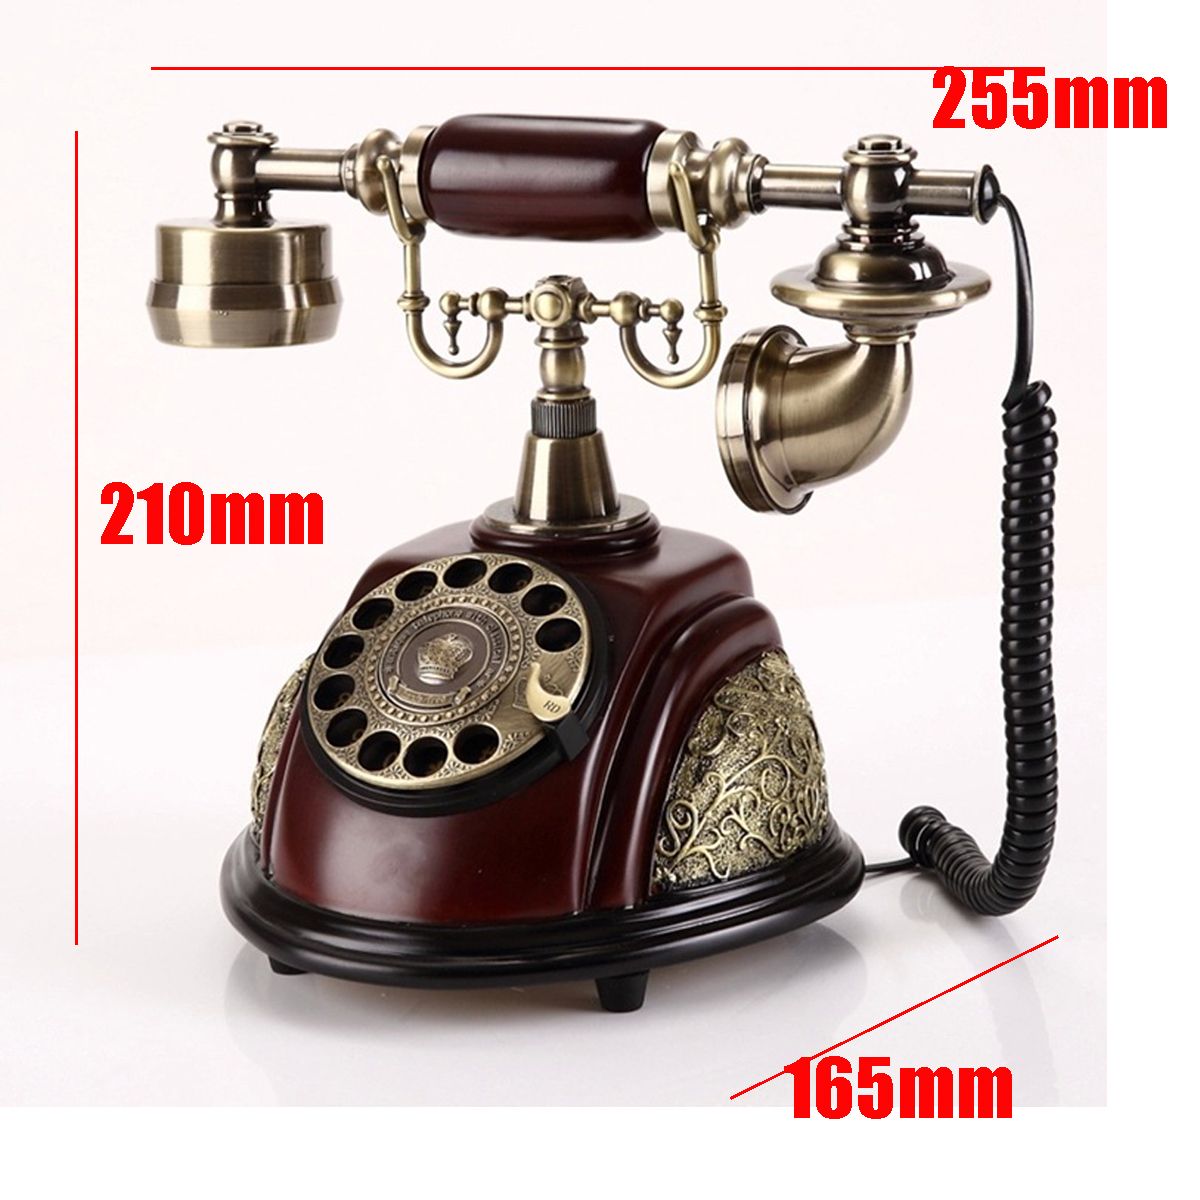 Vintage-Antique-Style-Rotary-Phone-Fashioned-Retro-Handset-Old-Telephone-Home-Office-Decor-1364847